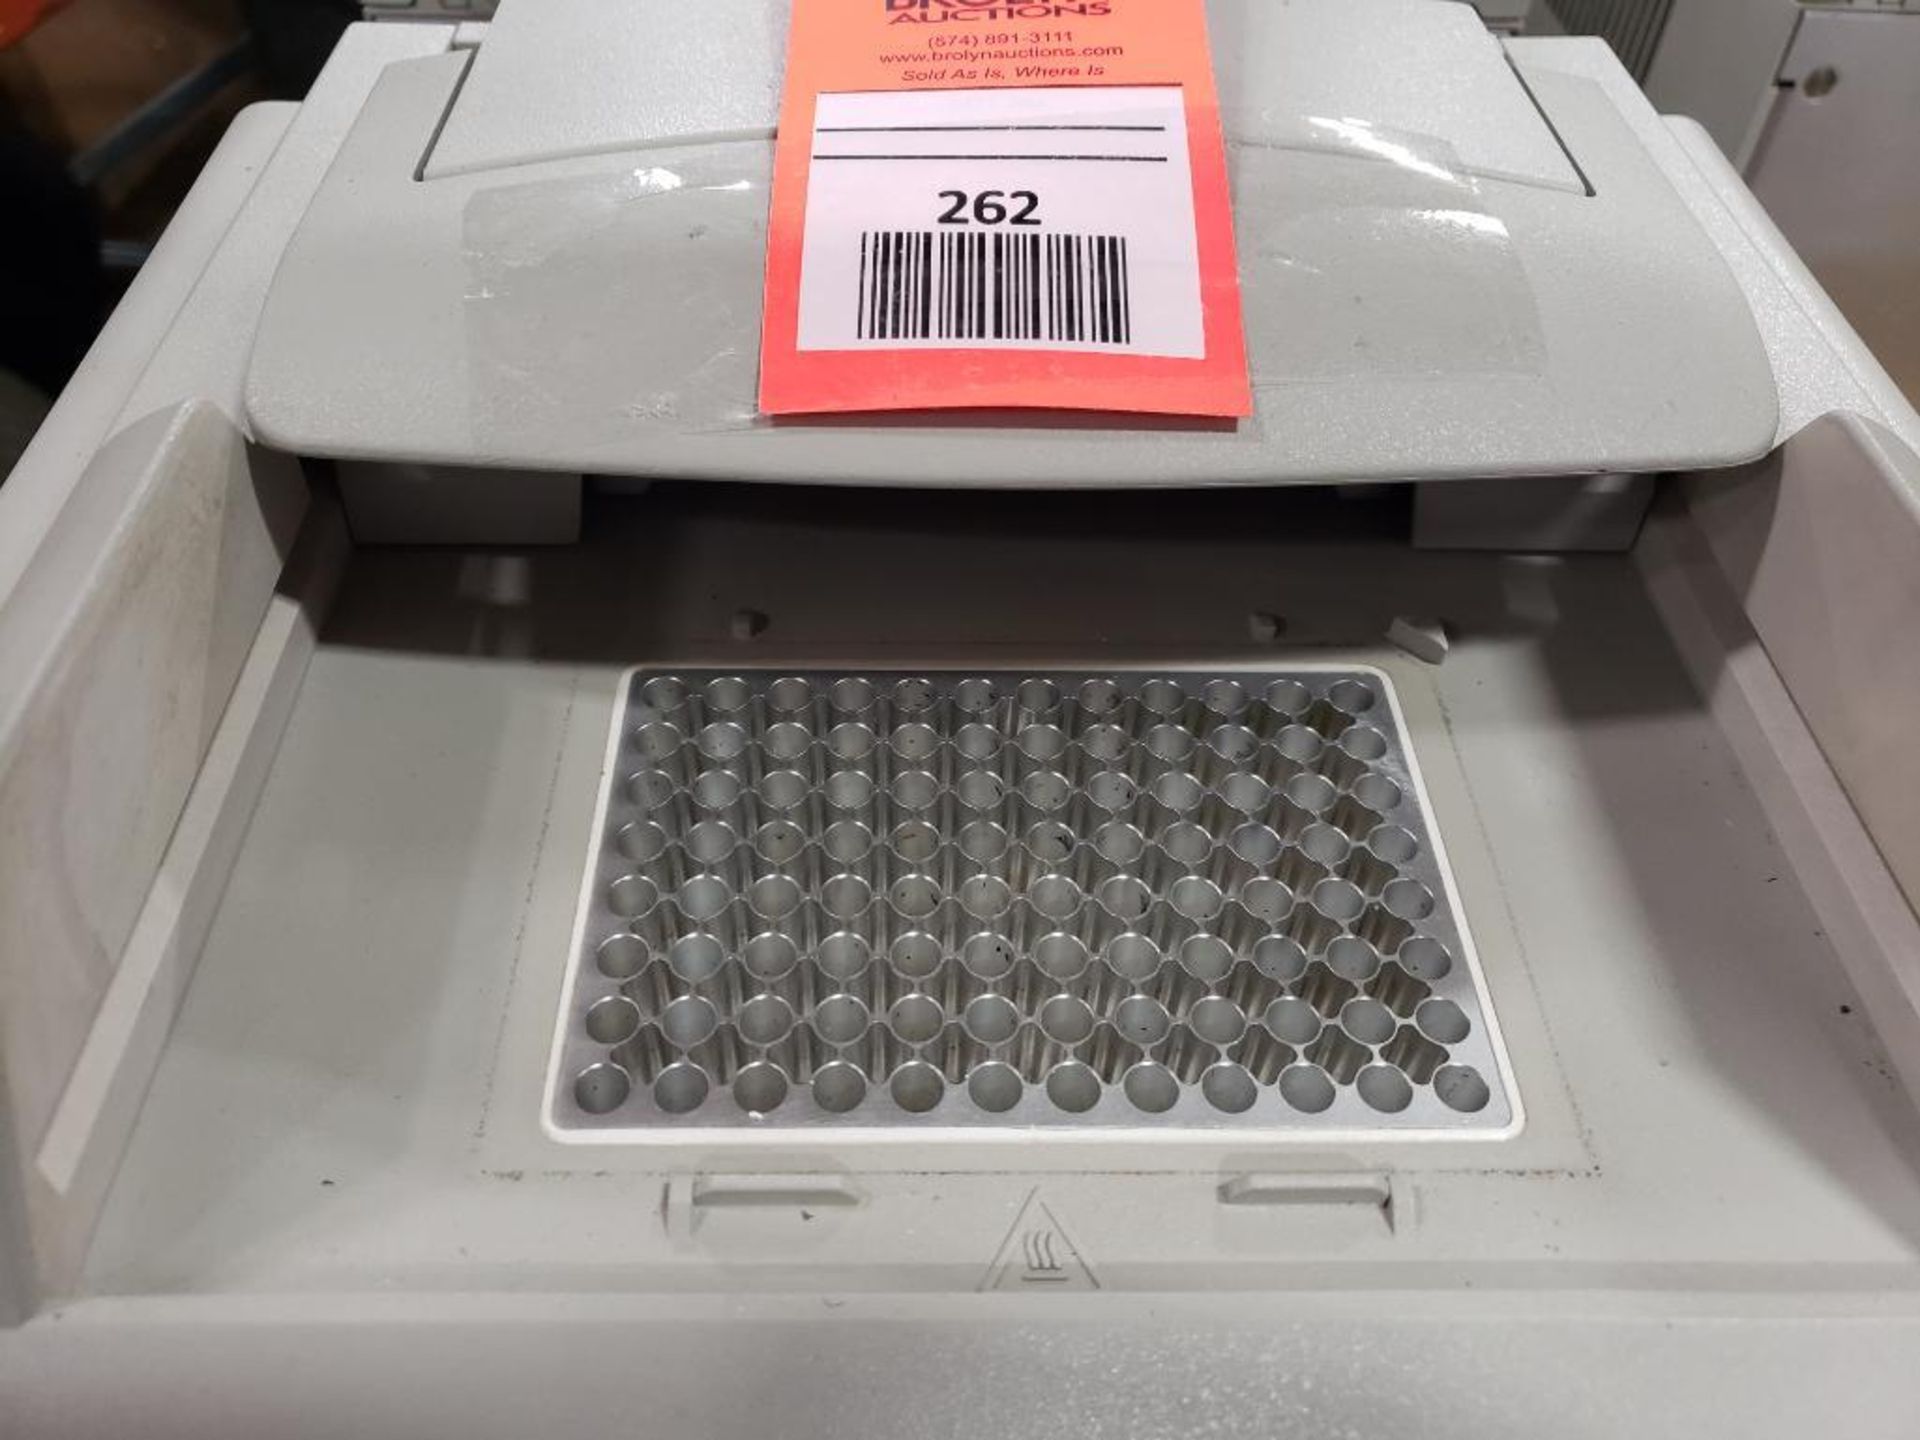 AB Applied Biosystems GeneAmp PCR System 9700. P/N: N8050200, S/N: 805S5111800. - Image 4 of 8